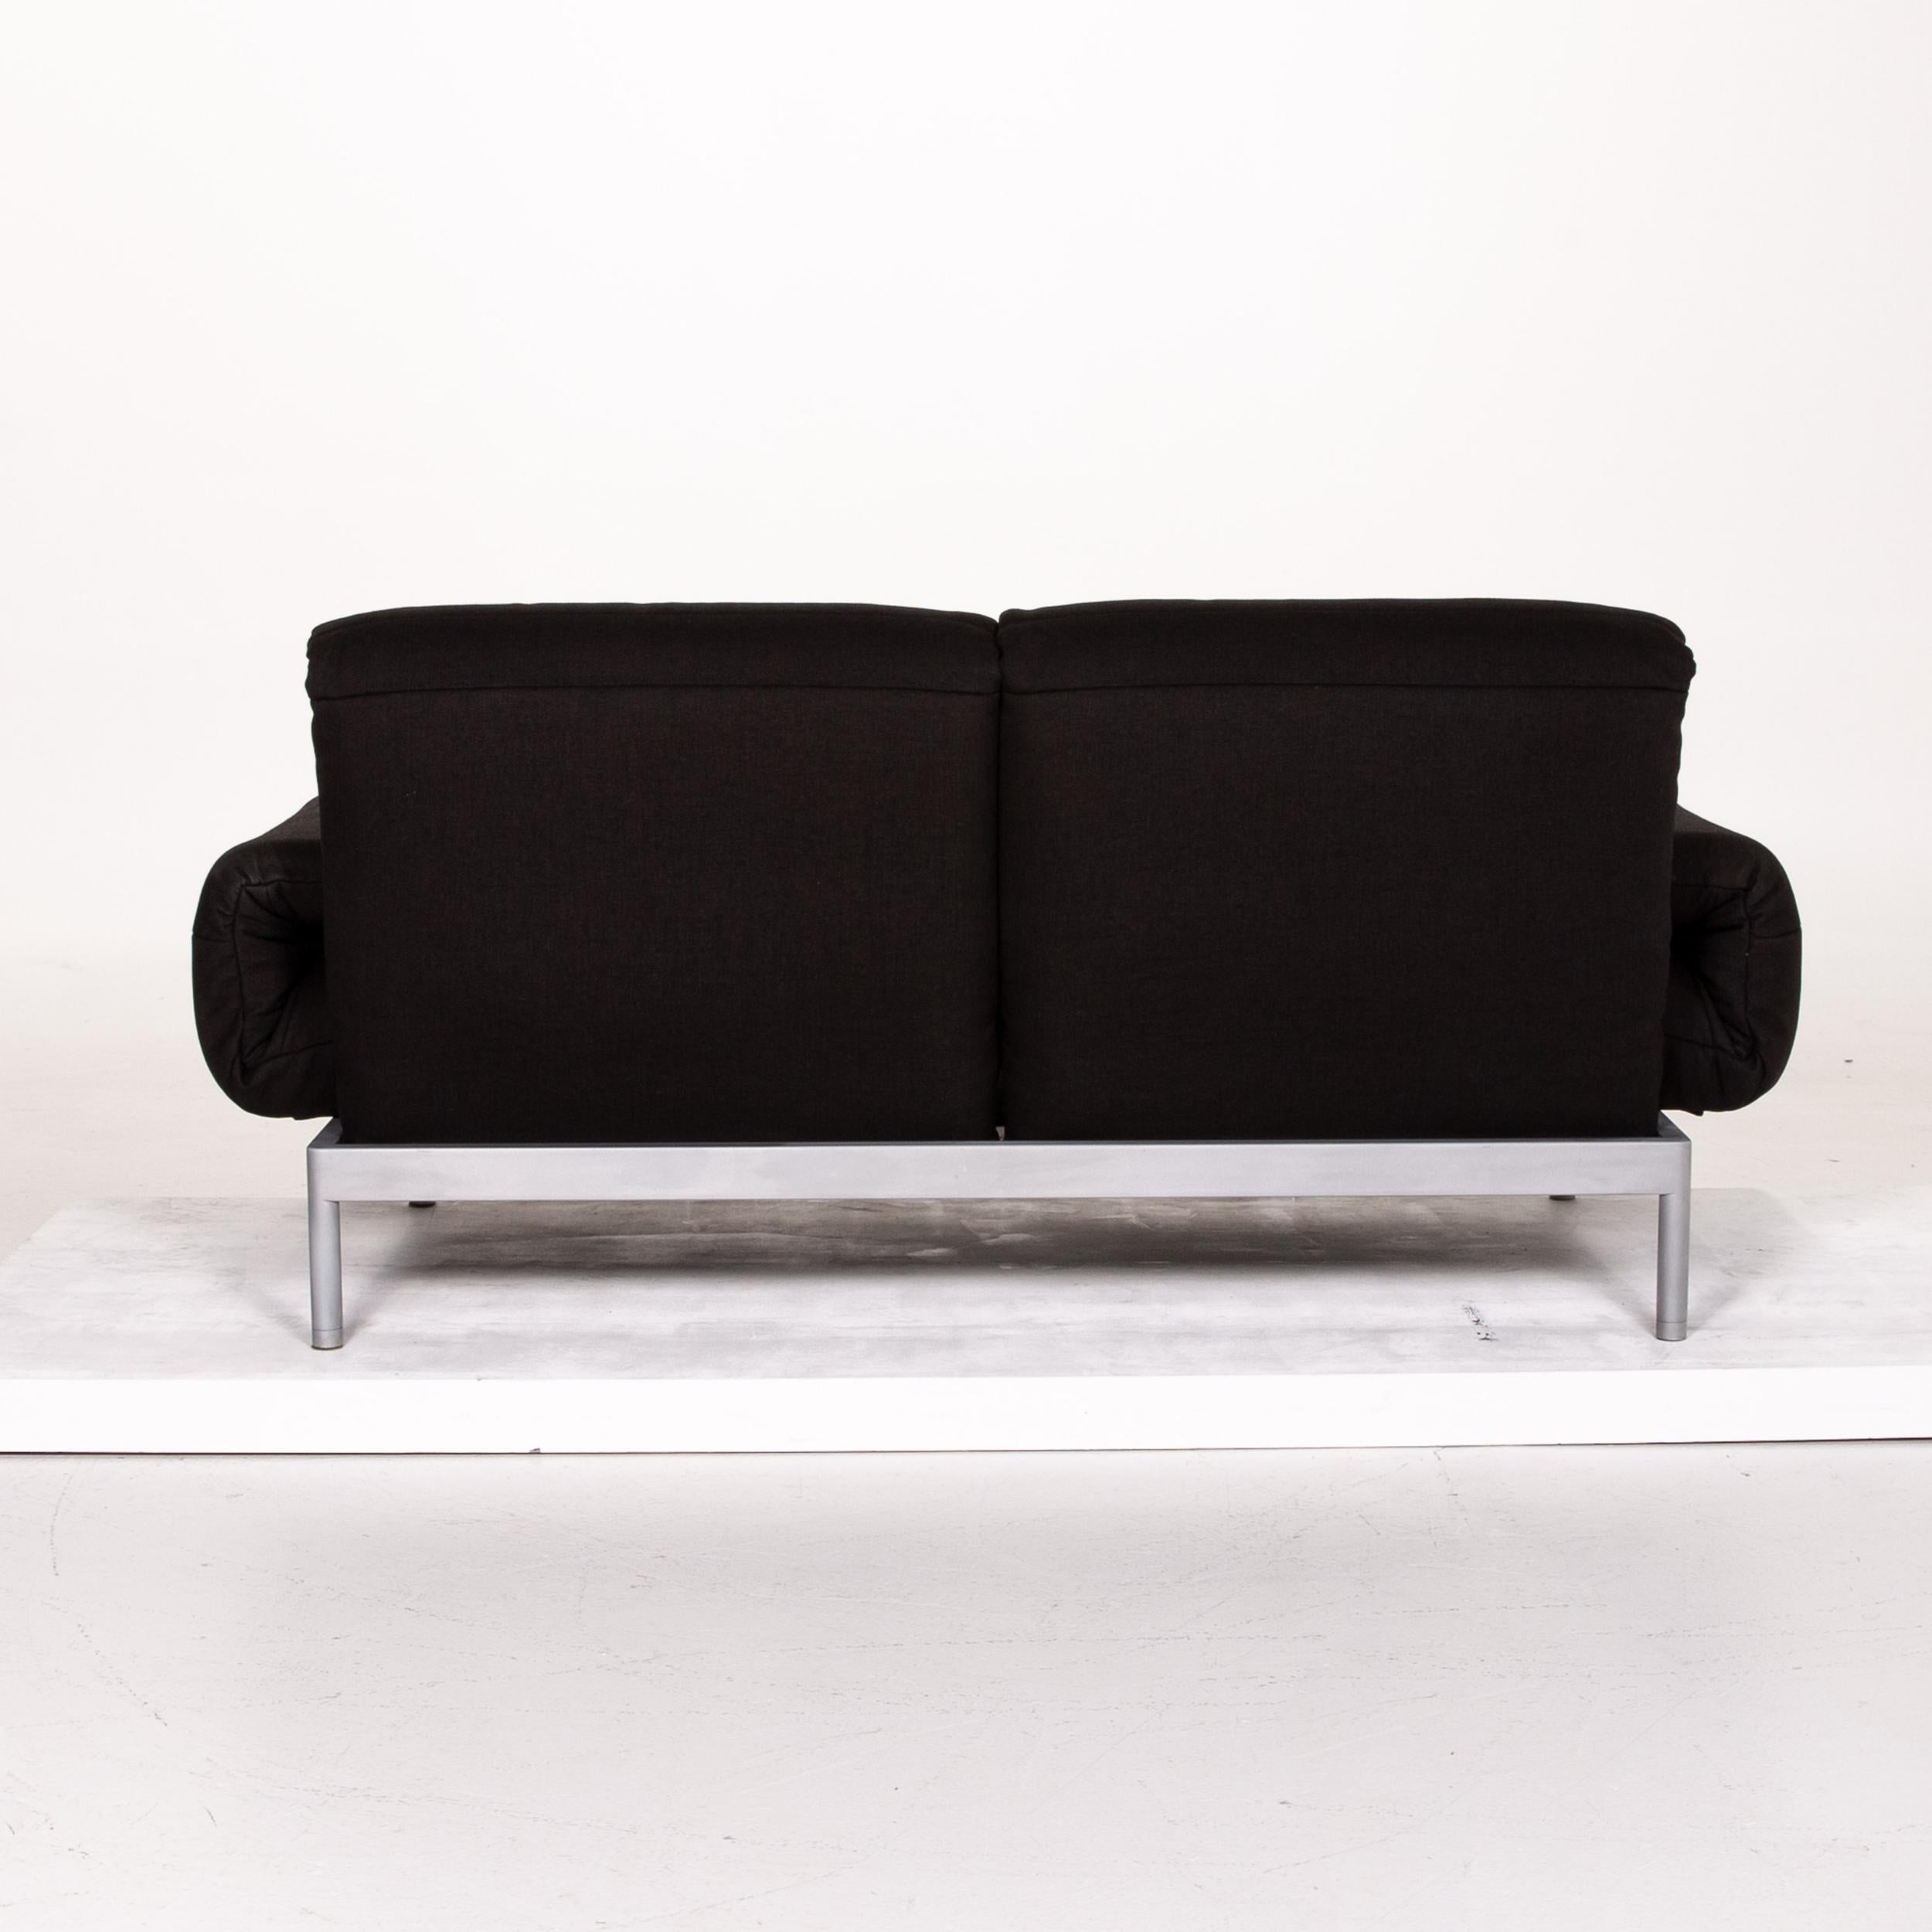 Rolf Benz Plura Fabric Sofa Black Two-Seat Function Relax Function Couch 5